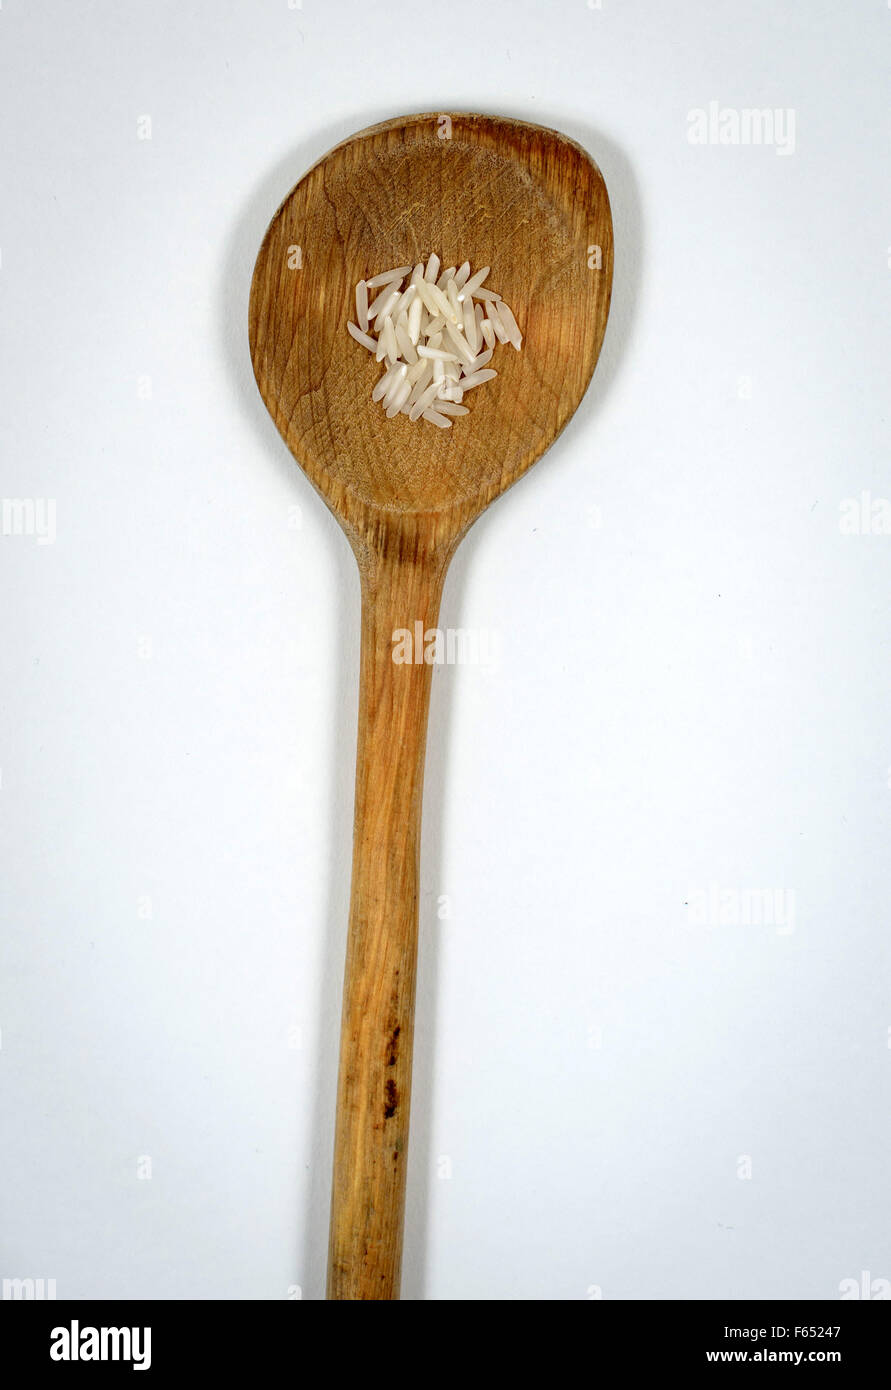 ILLUSTRATION - A small amount of rice on a wooden spoon. The photo was taken on 13 March 2015 in Dresden (Saxony). Photo: Thomas Eisenhuth Stock Photo